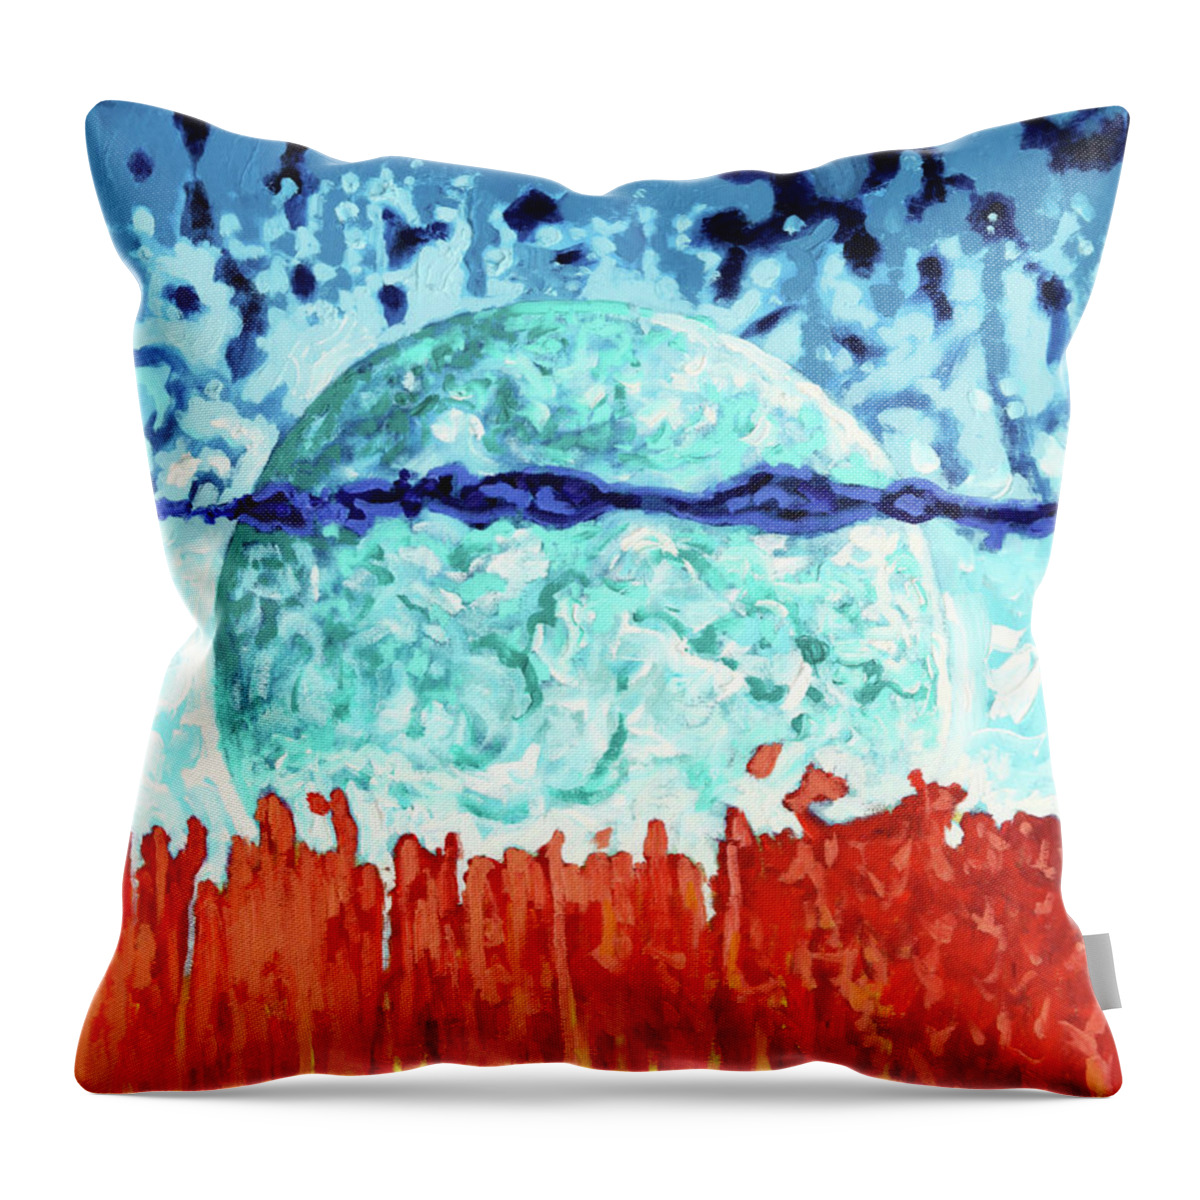 Earth Throw Pillow featuring the painting Heat Waves by John Lautermilch